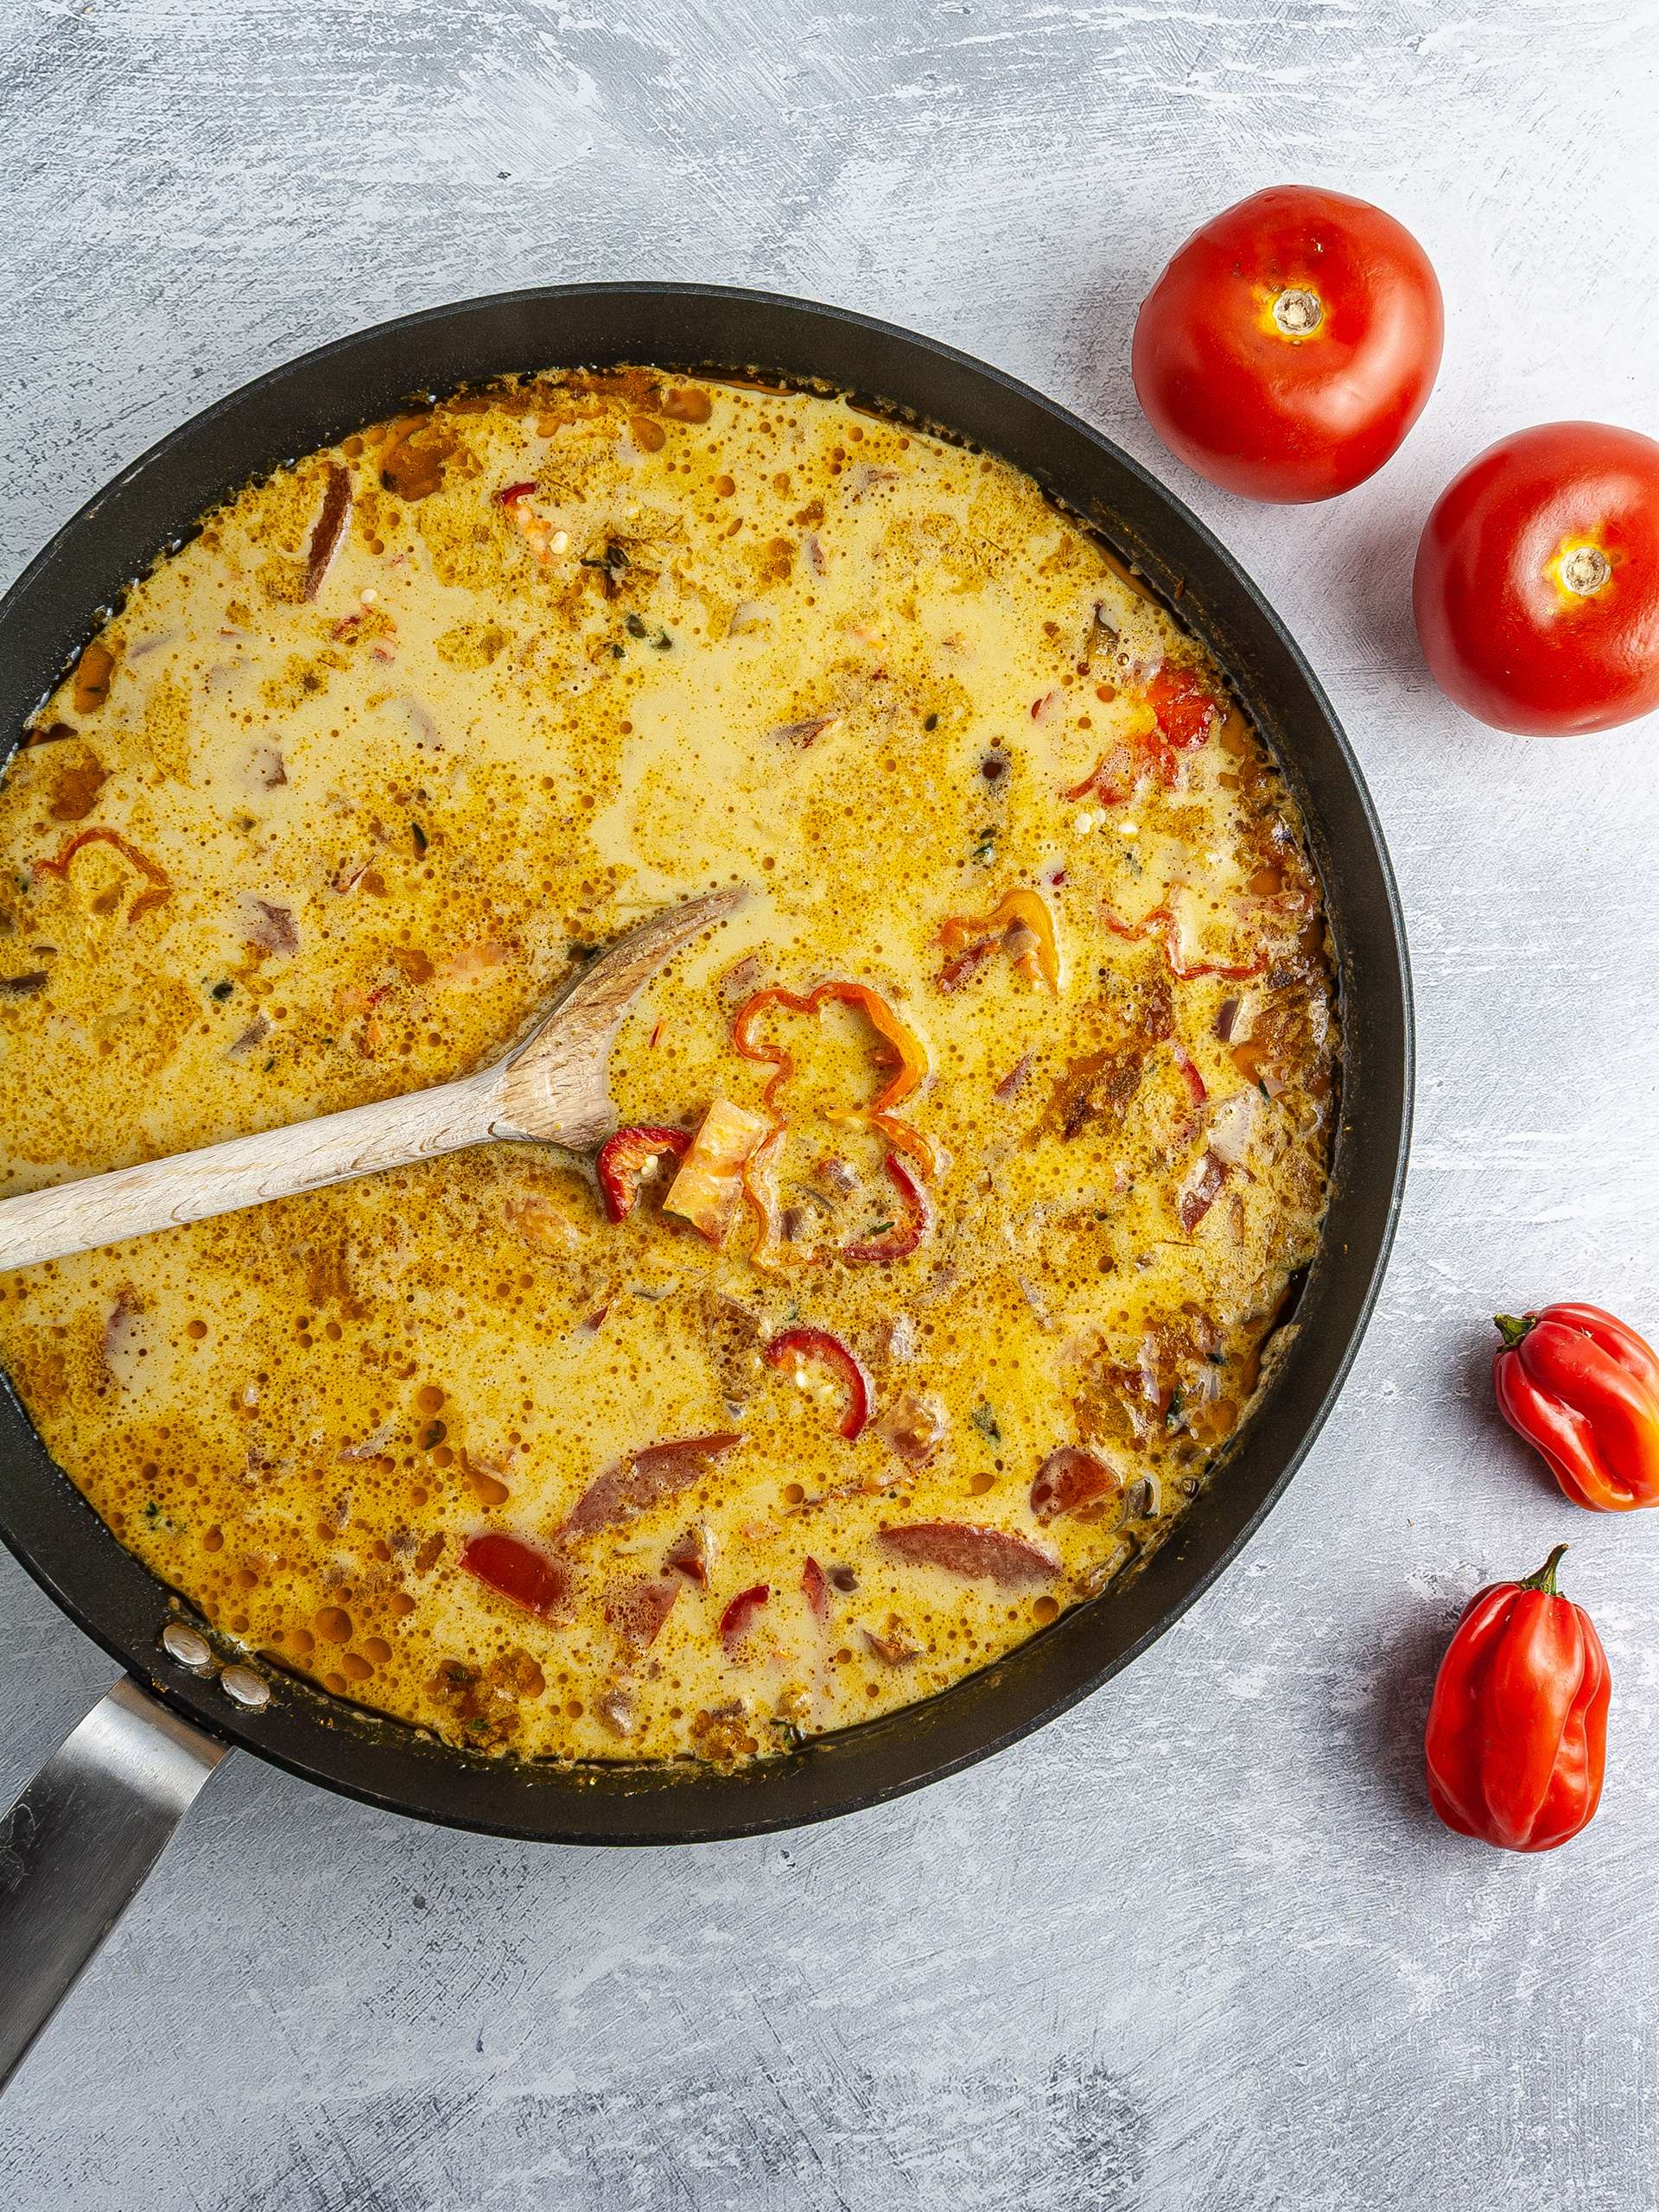 Coconut milk, tomatoes, and scotch bonnet chillies in a skillet